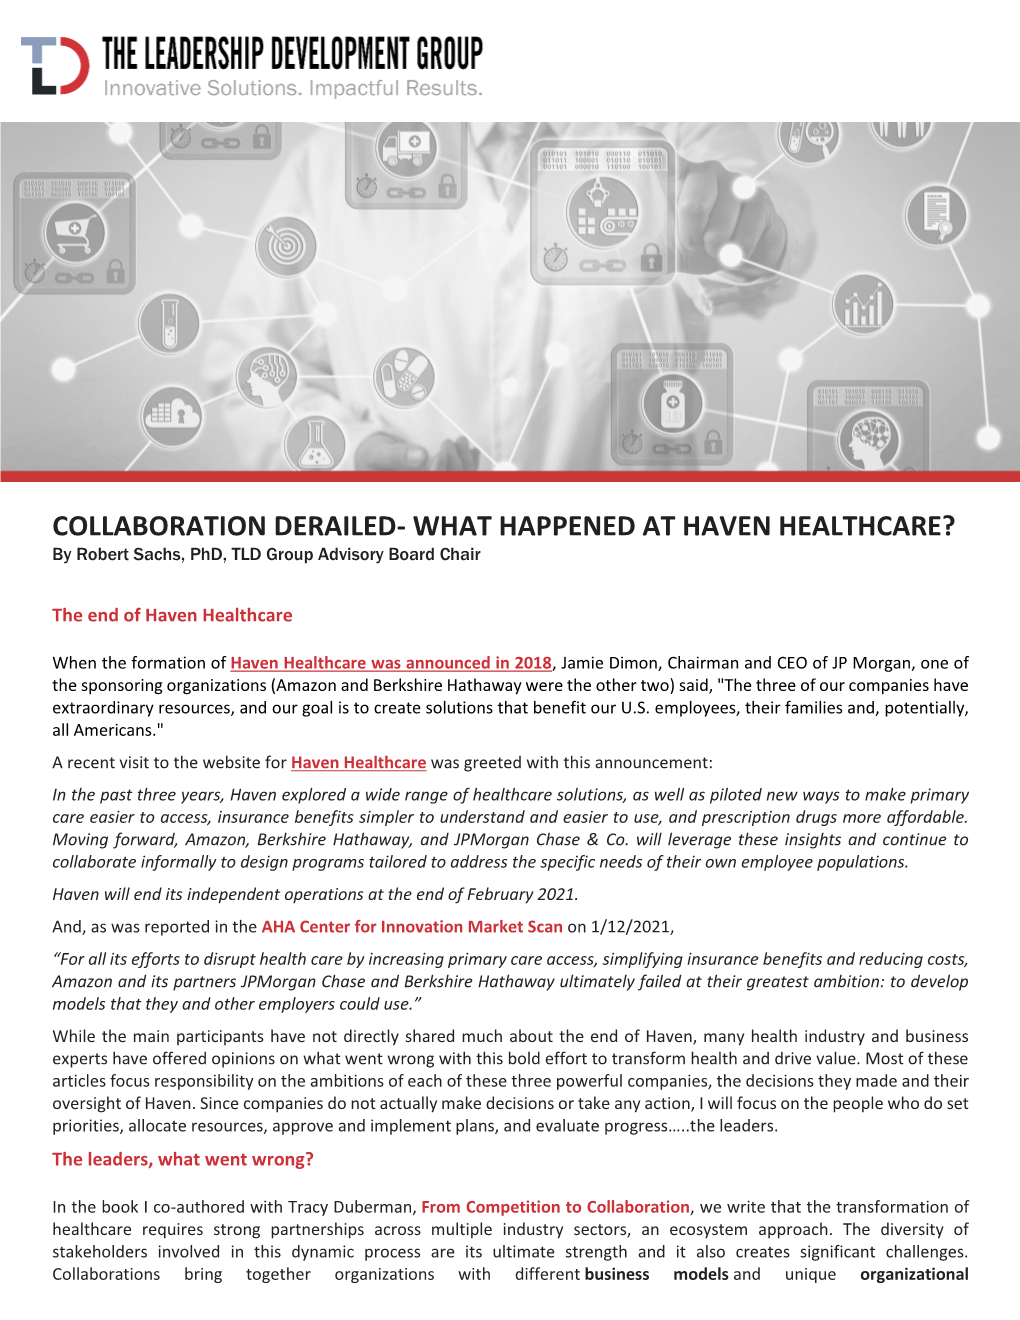 COLLABORATION DERAILED- WHAT HAPPENED at HAVEN HEALTHCARE? by Robert Sachs, Phd, TLD Group Advisory Board Chair